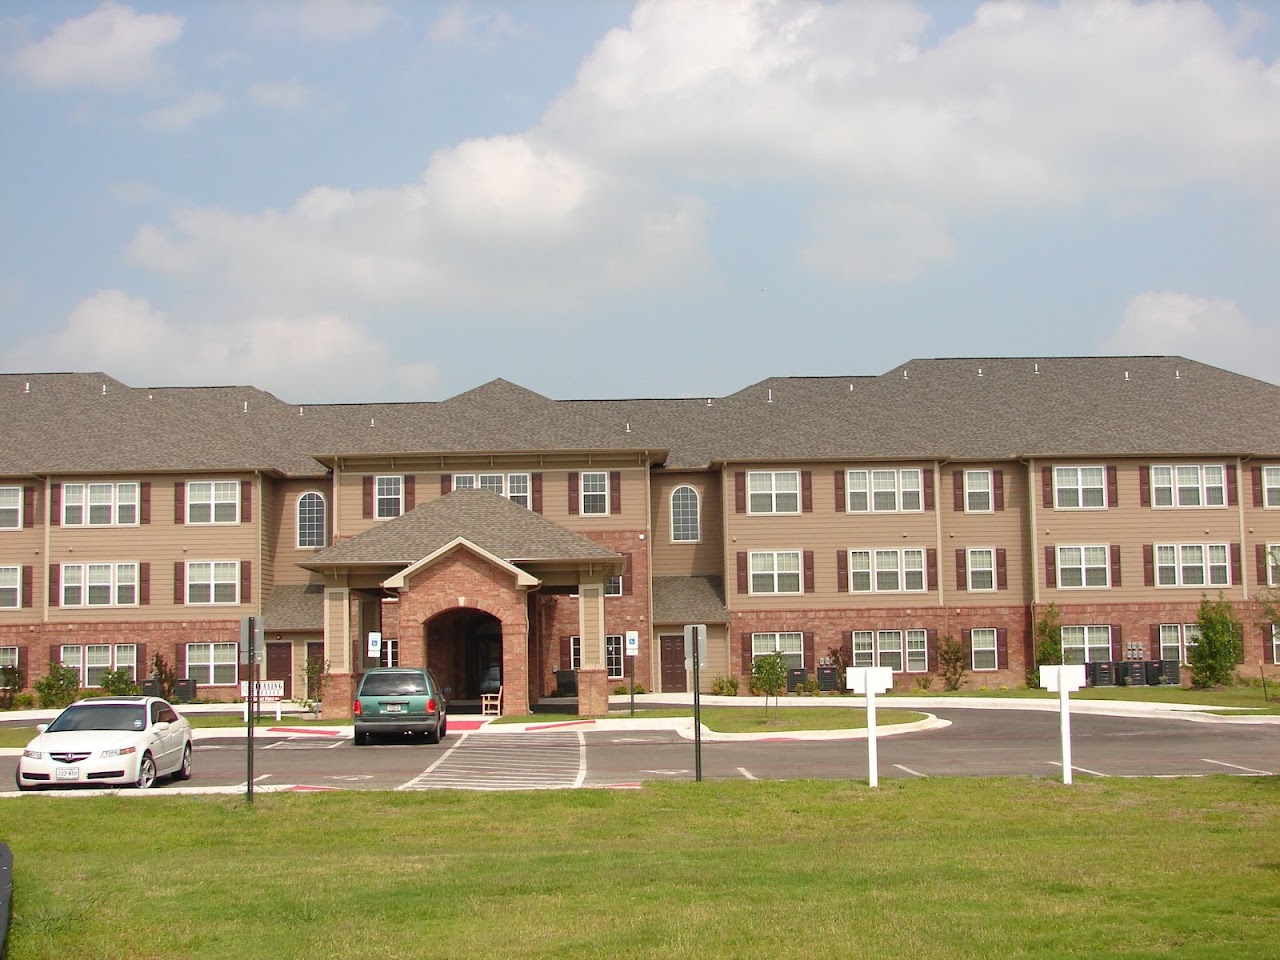 Photo of MARKET PLACE APTS. Affordable housing located at 340 MARKET PL BLVD BROWNWOOD, TX 76801